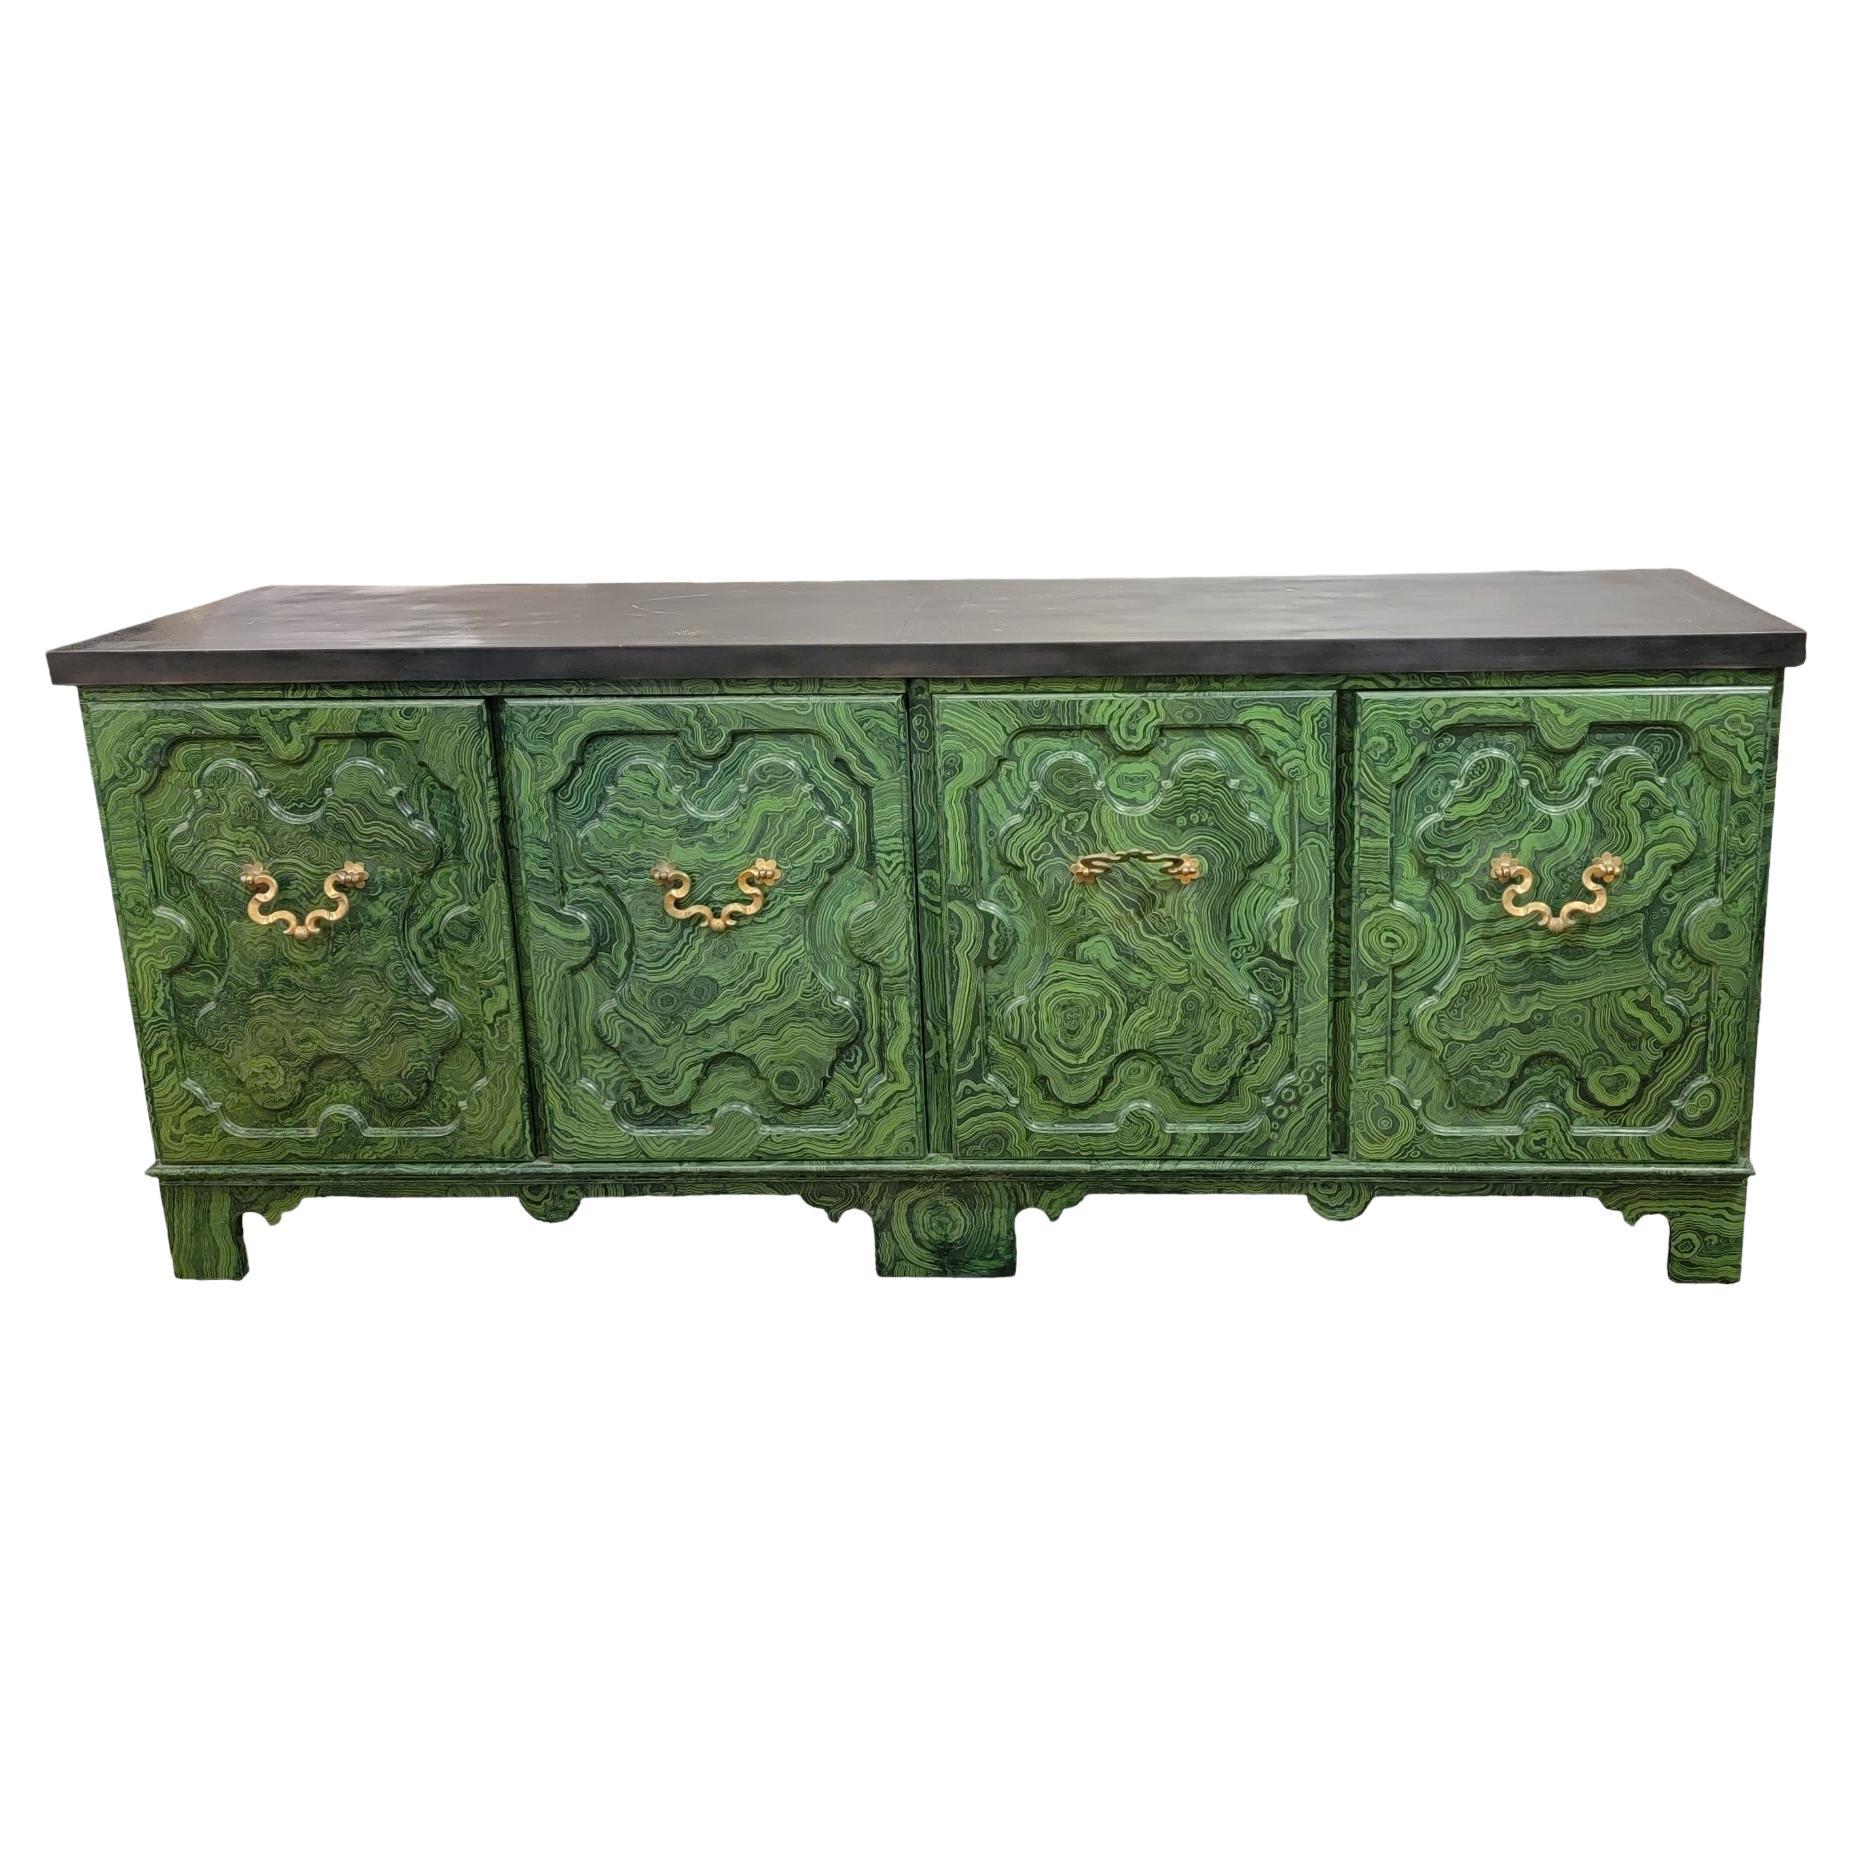 Hand Painted Baker 4 Door Credenza With Ornate Brass Handles by Tony Duquette